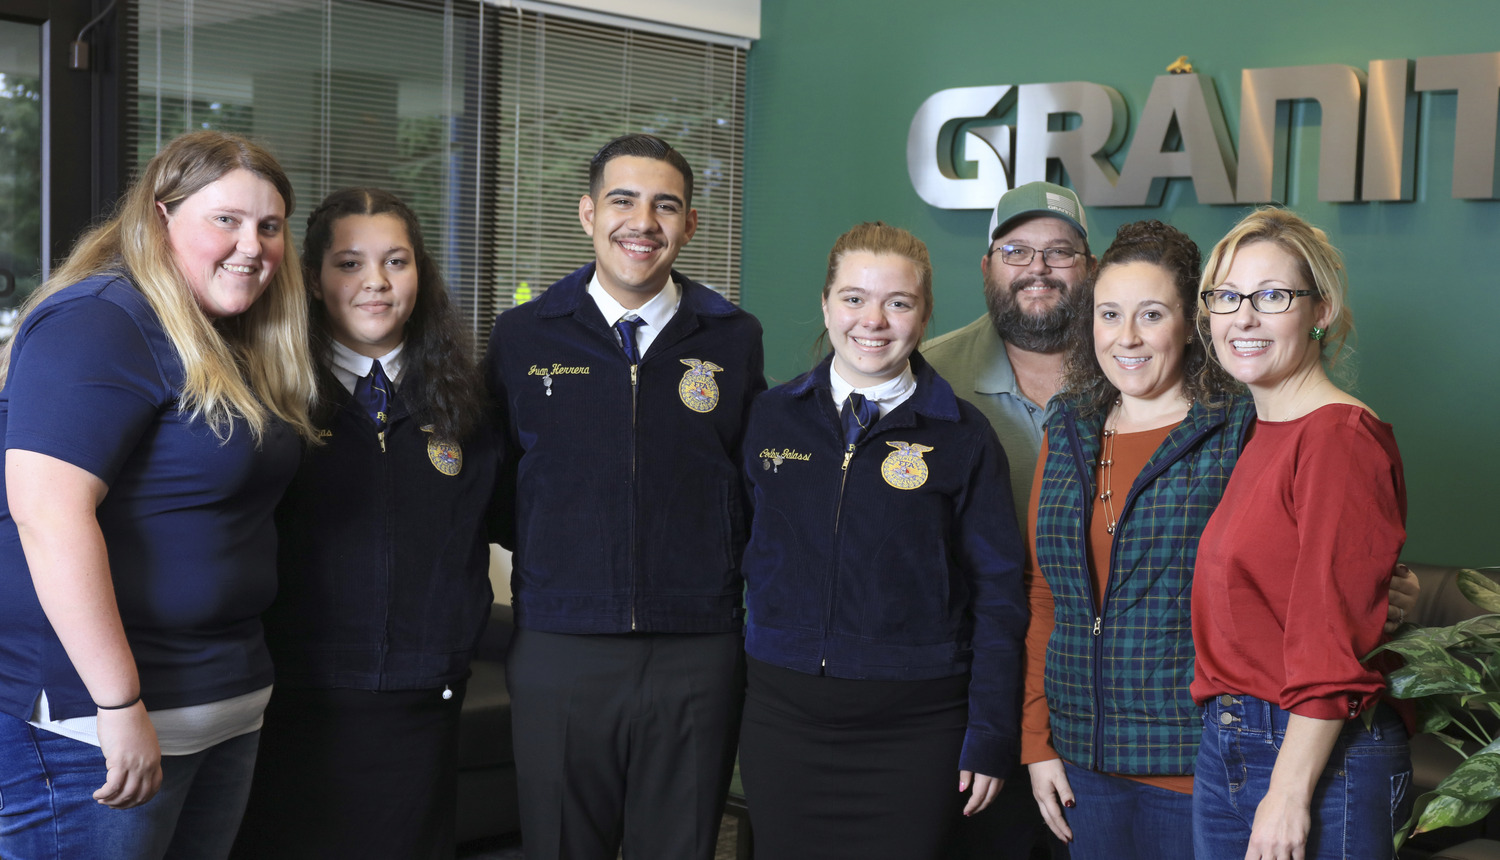 T Partnering with our local FFA to help build a better future.